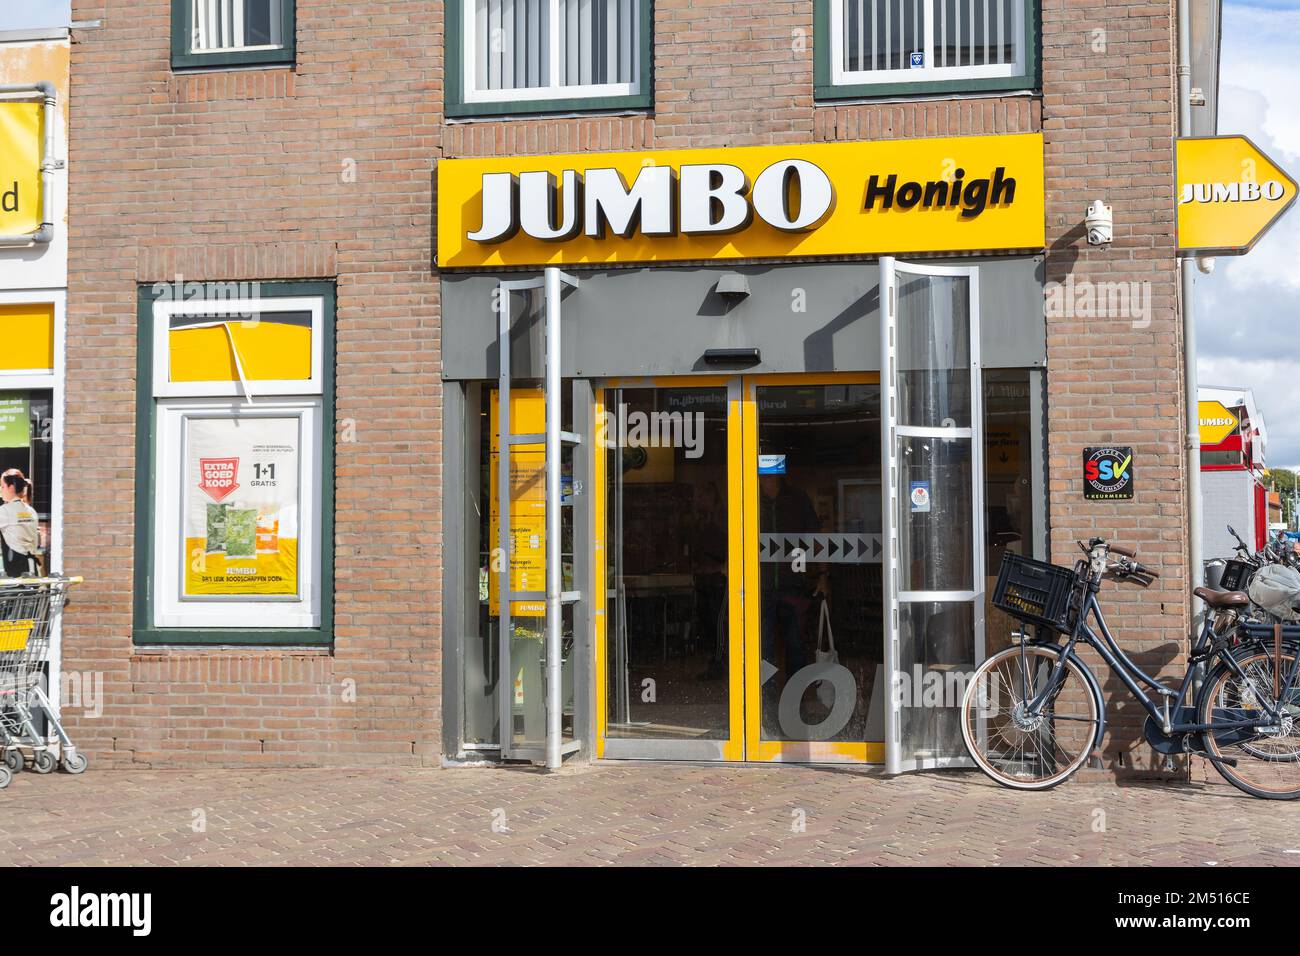 Entrance of the local Jumbo food store. Jumbo is the second